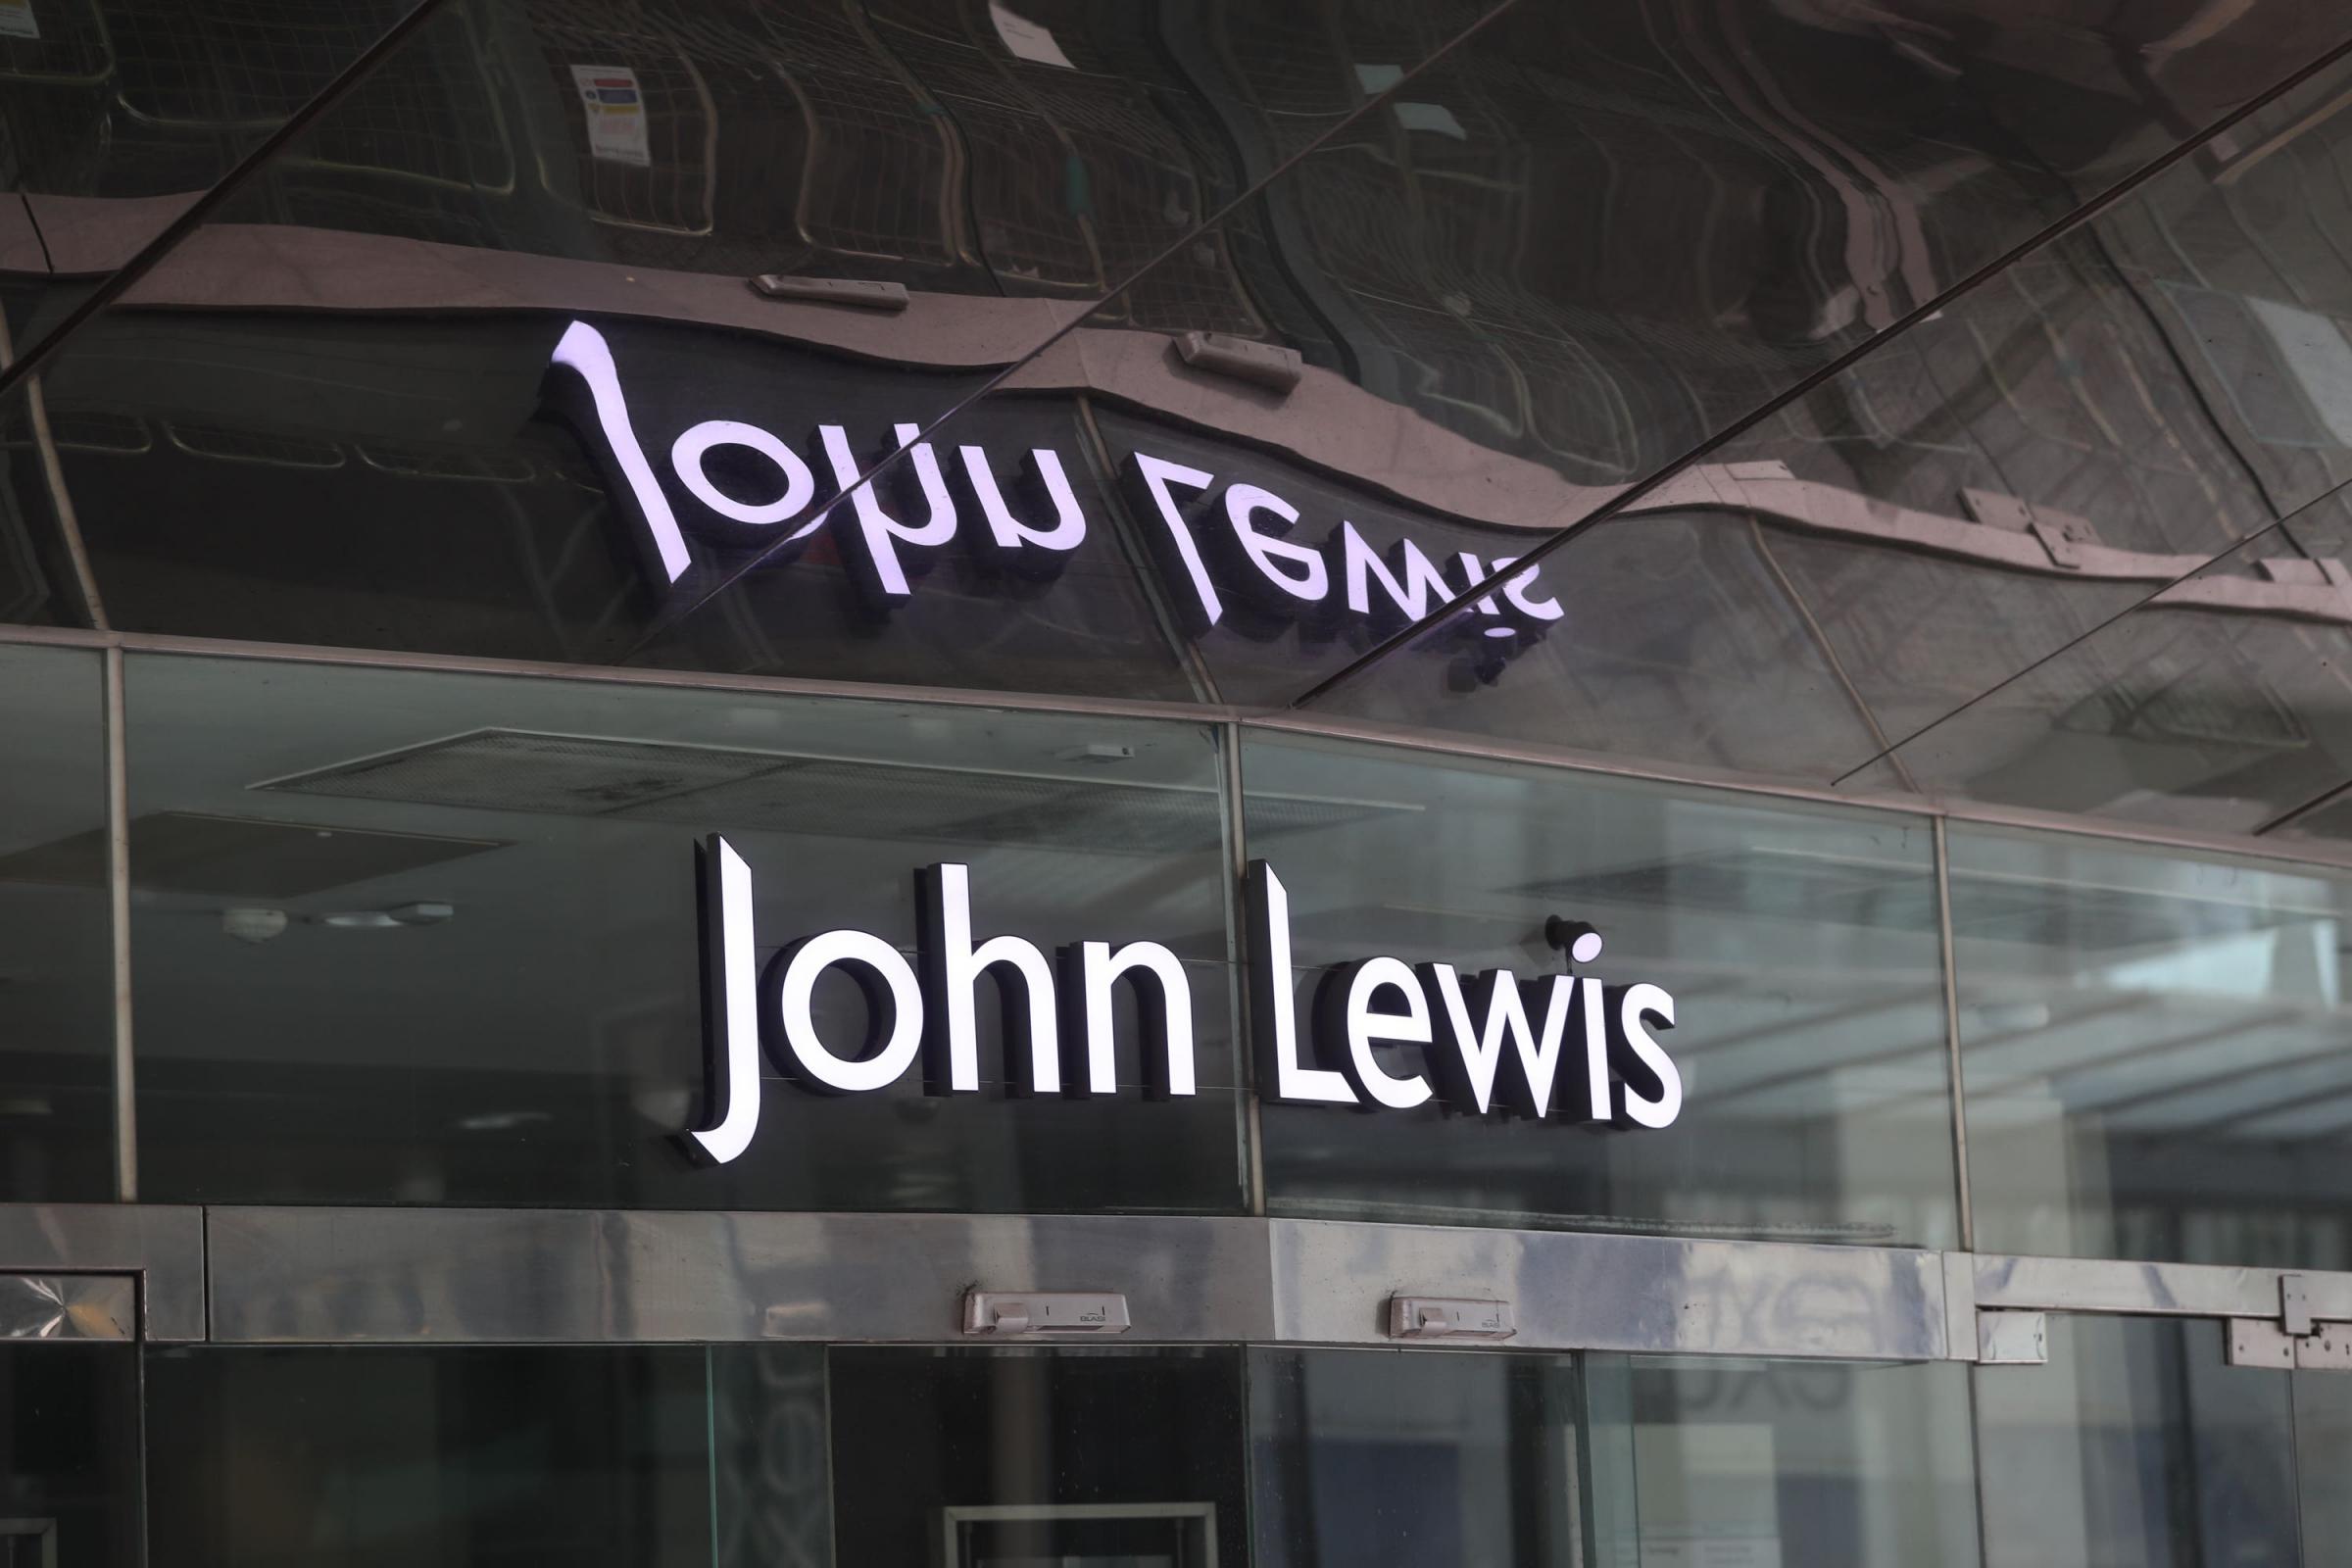 Man says he was too drunk to remember robbing John Lewis in Glasgow